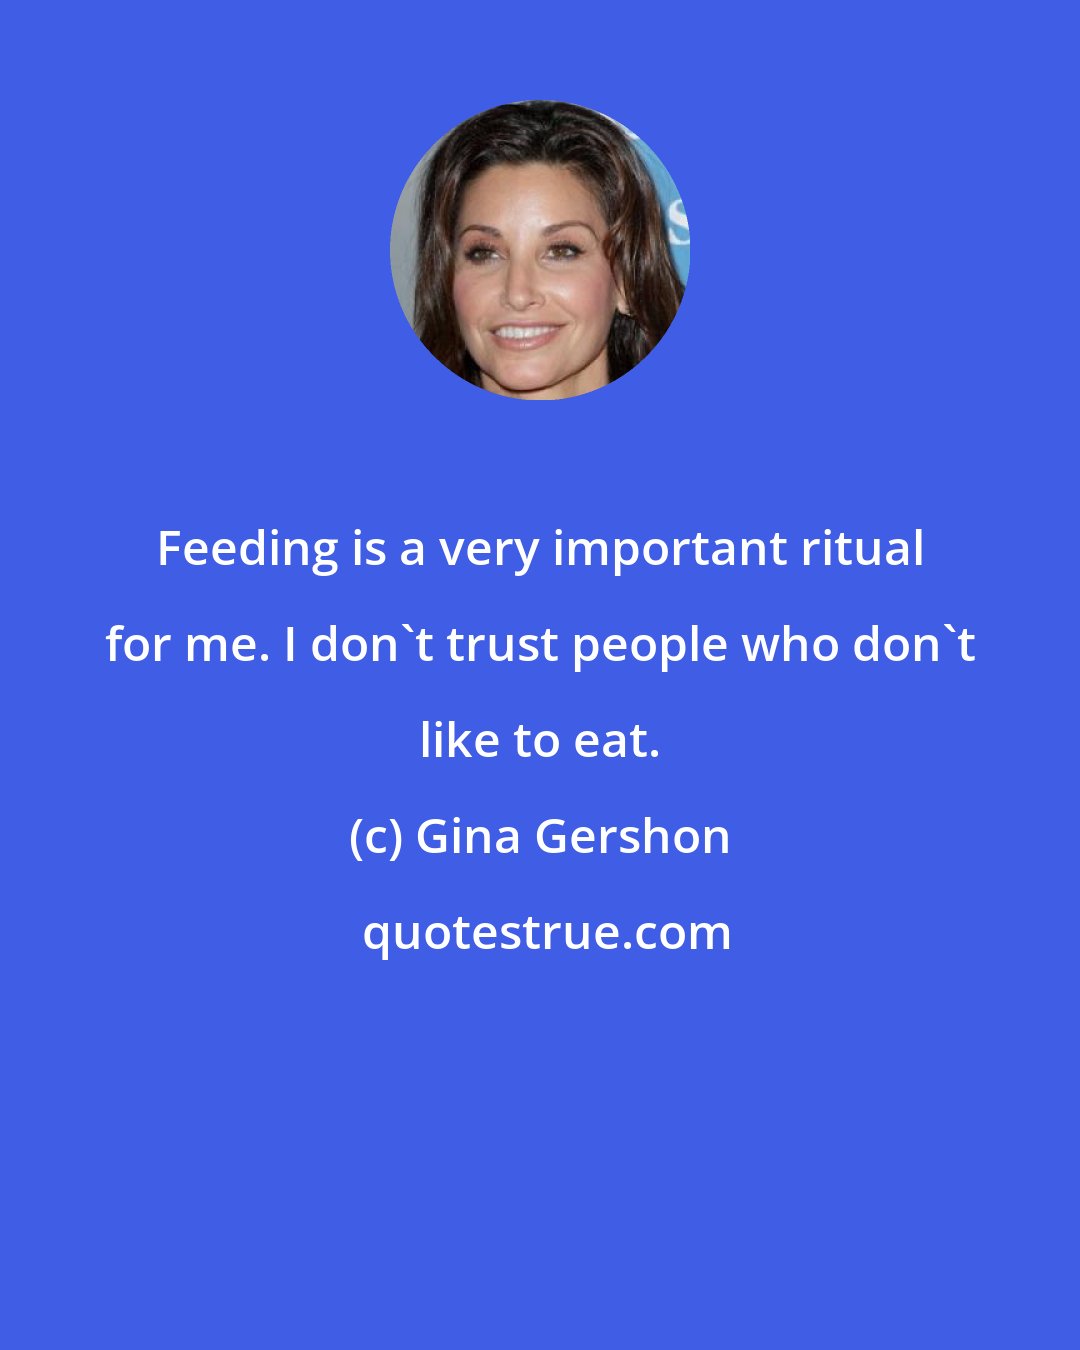 Gina Gershon: Feeding is a very important ritual for me. I don't trust people who don't like to eat.